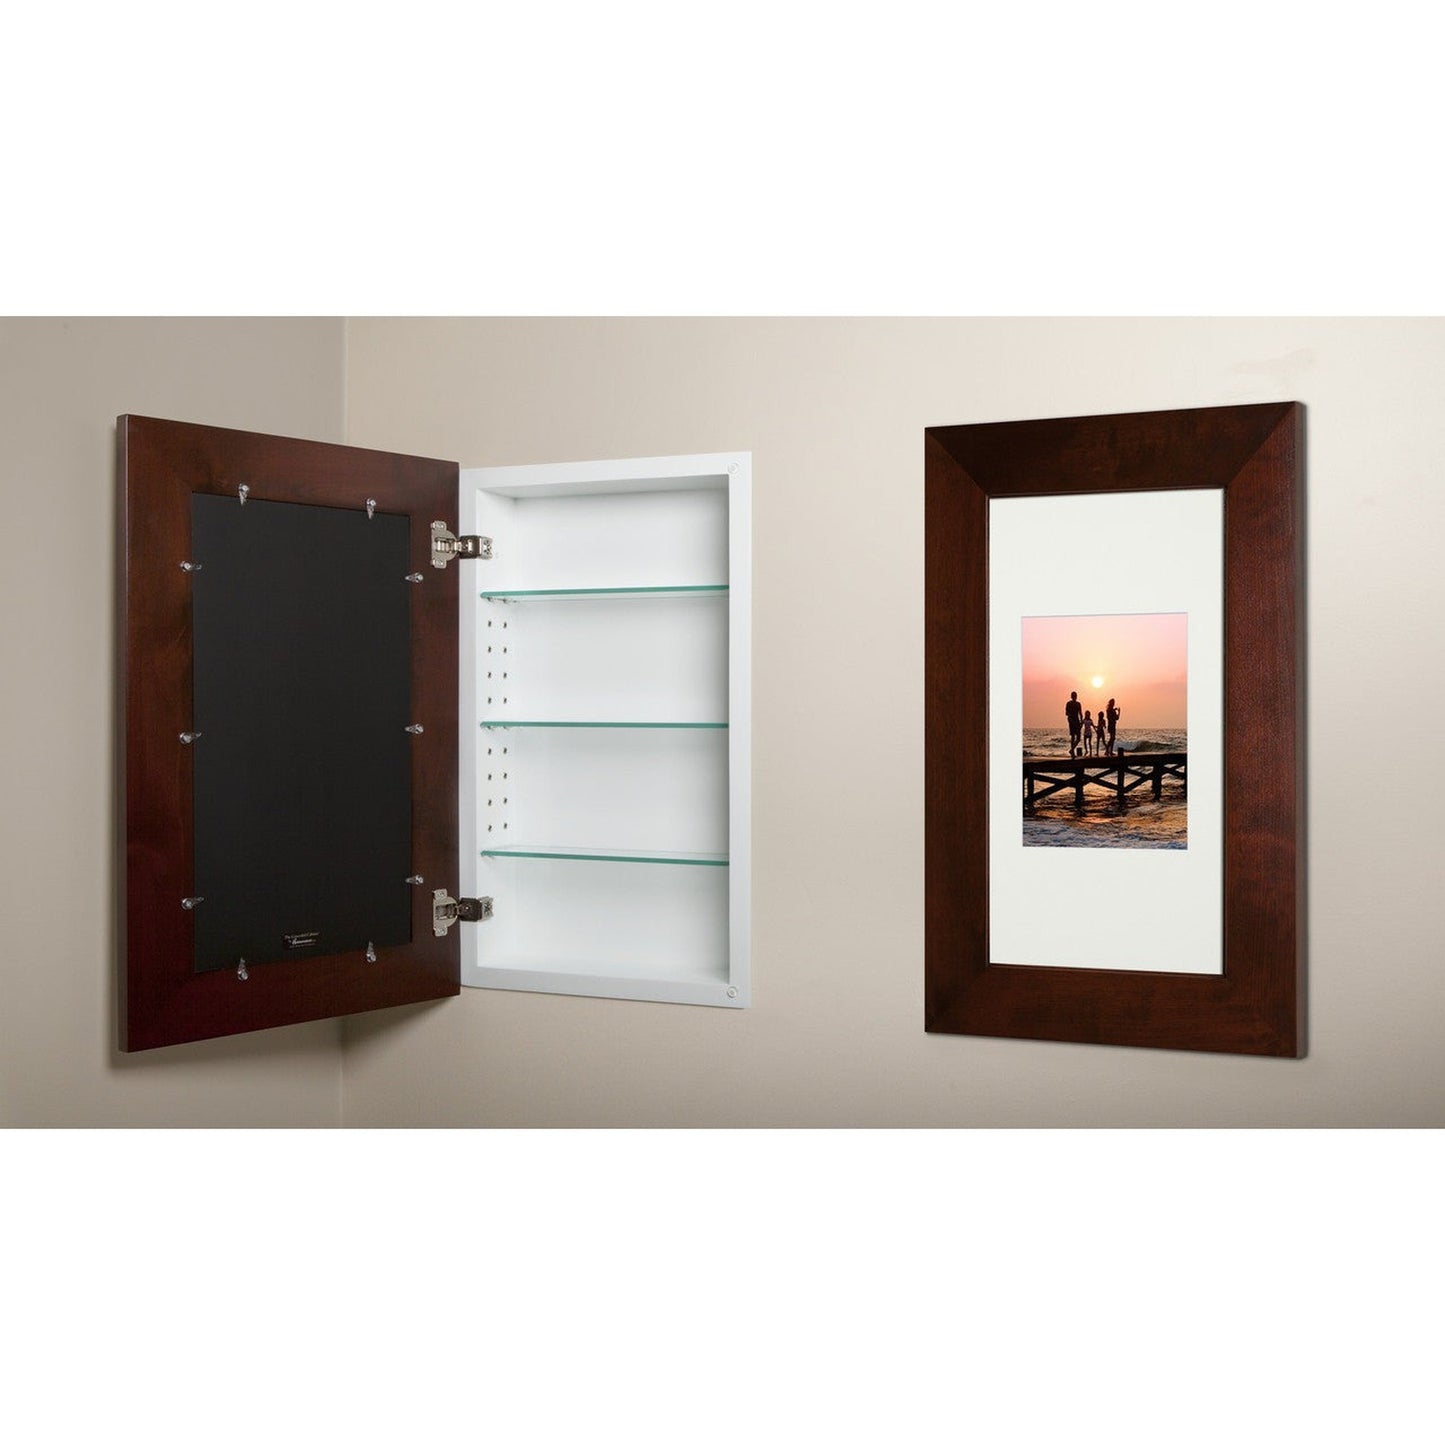 Fox Hollow Furnishings 14" x 24" Espresso Extra Large Standard 3.75" Depth White Interior Recessed Picture Frame Medicine Cabinet With Mirror